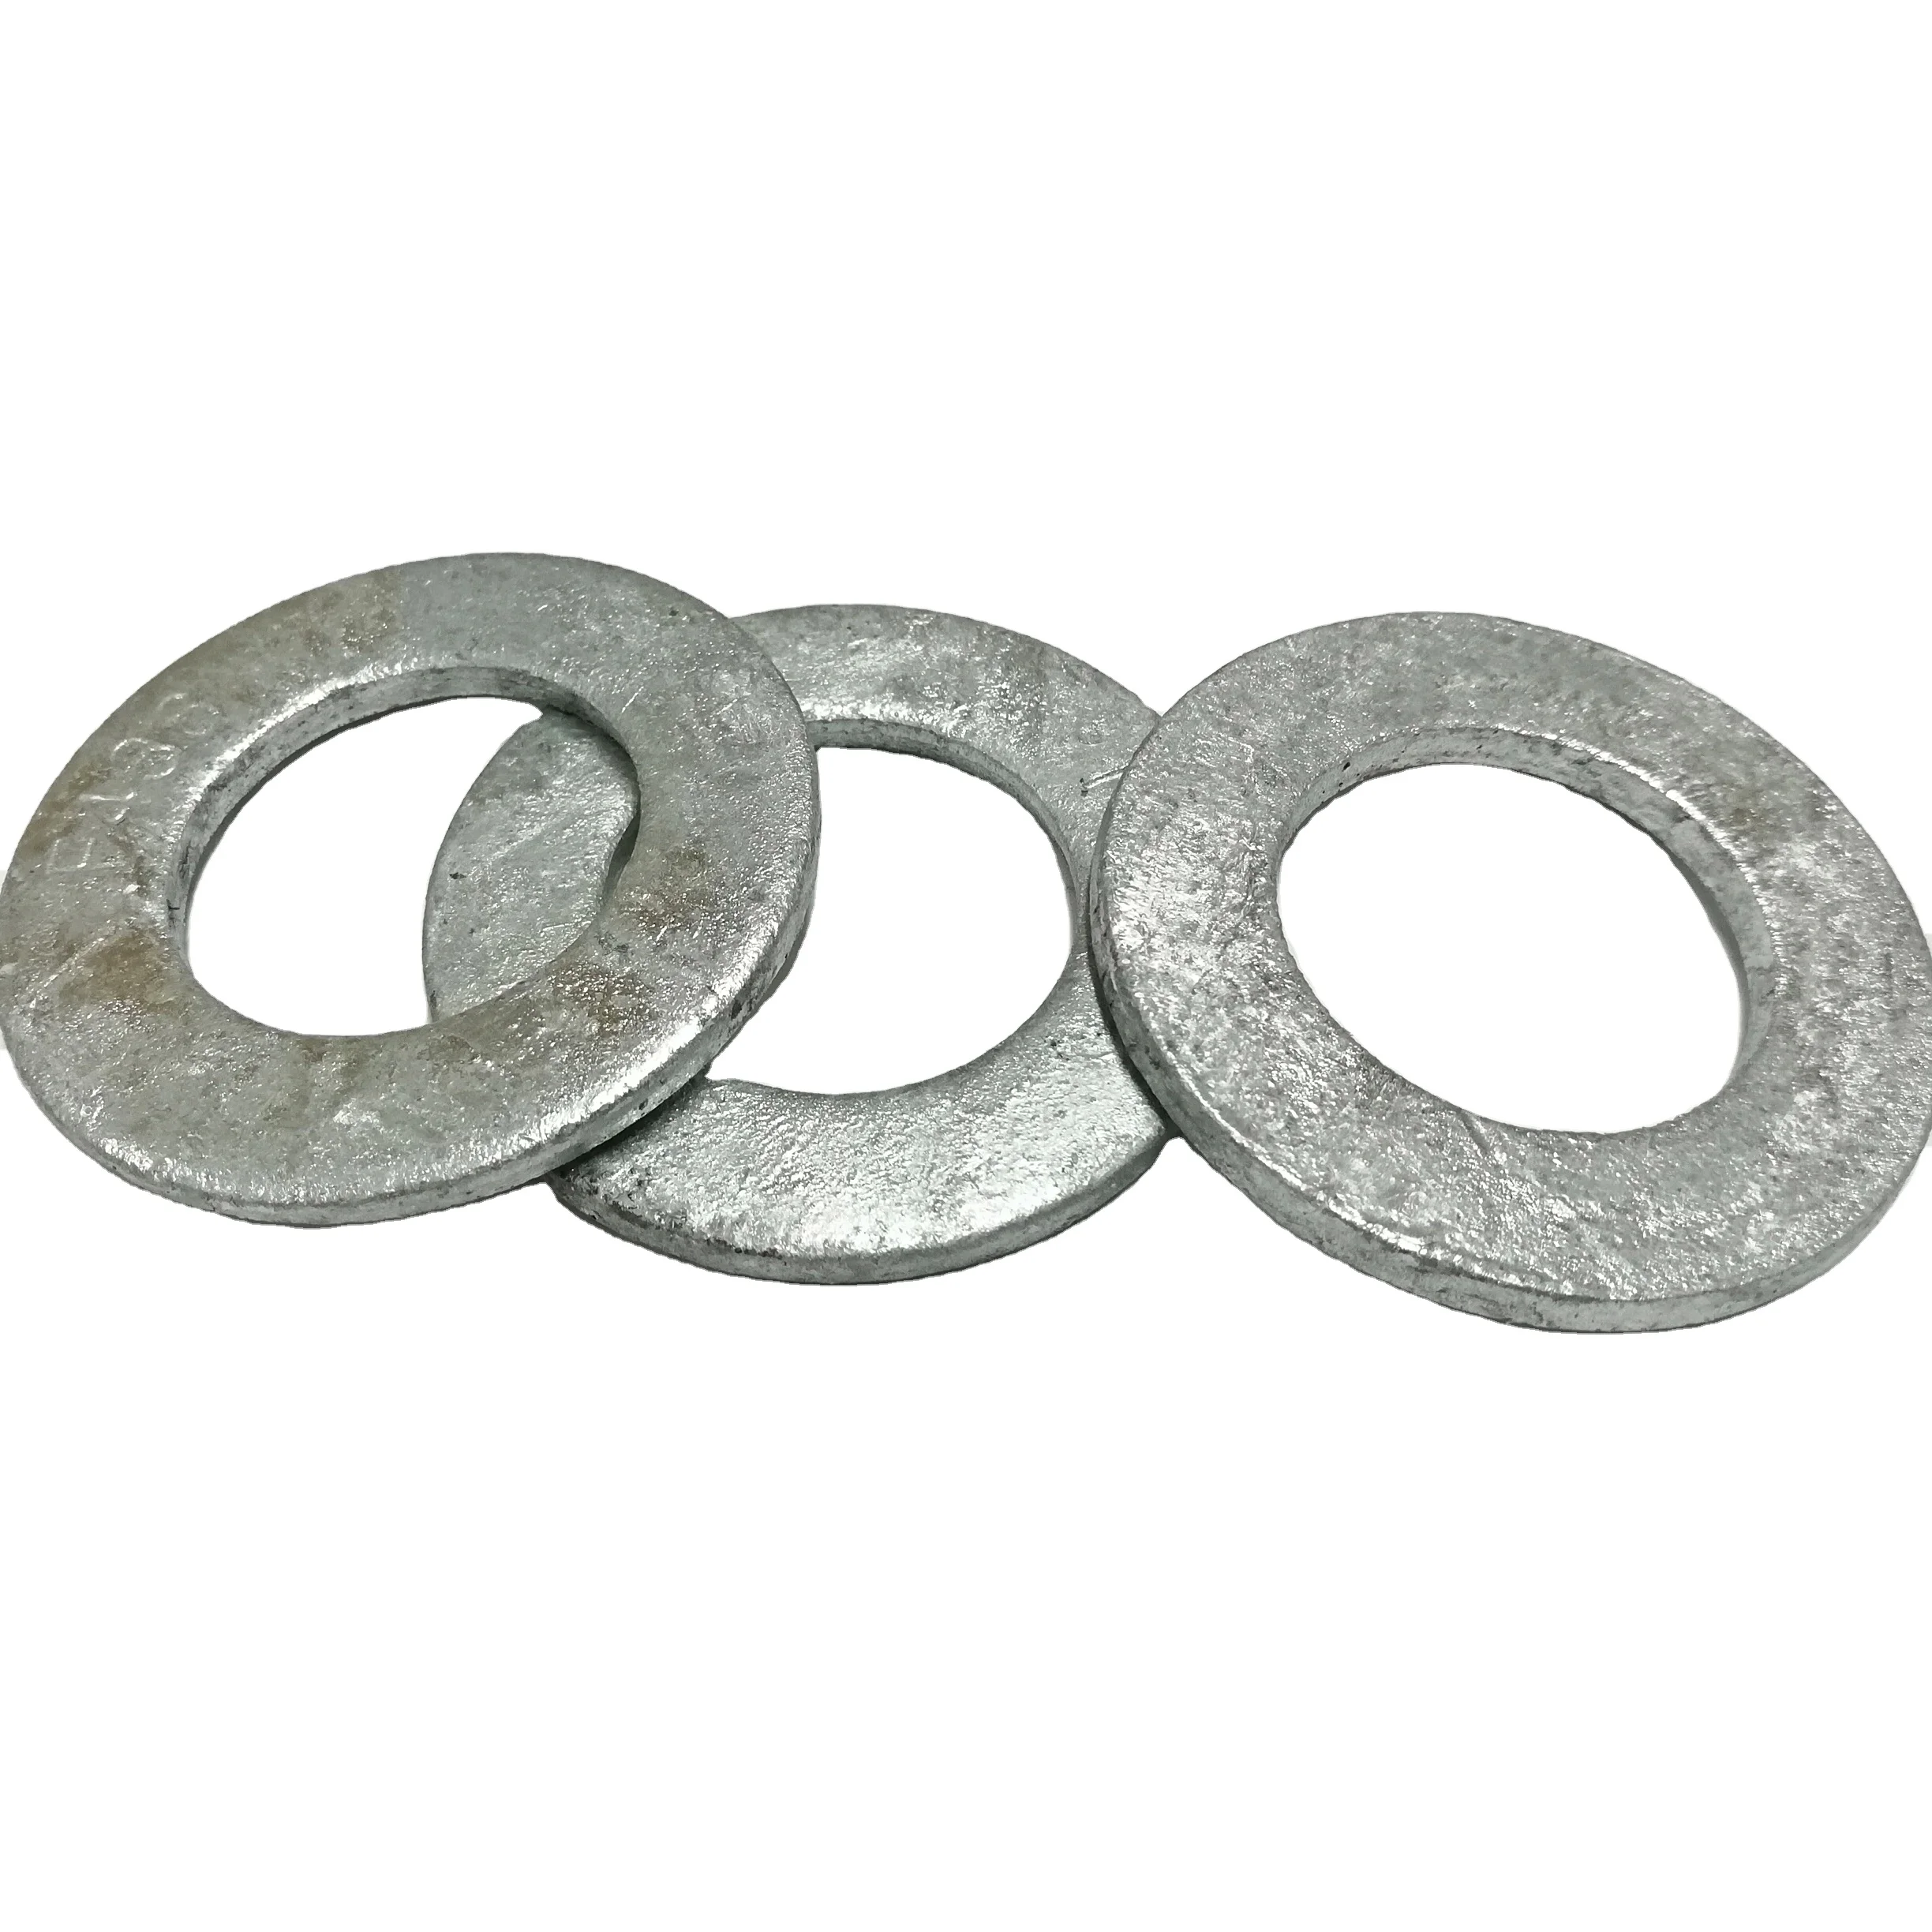 Washer Seal F436 3-3/8"  *FREE SHIPPING* 